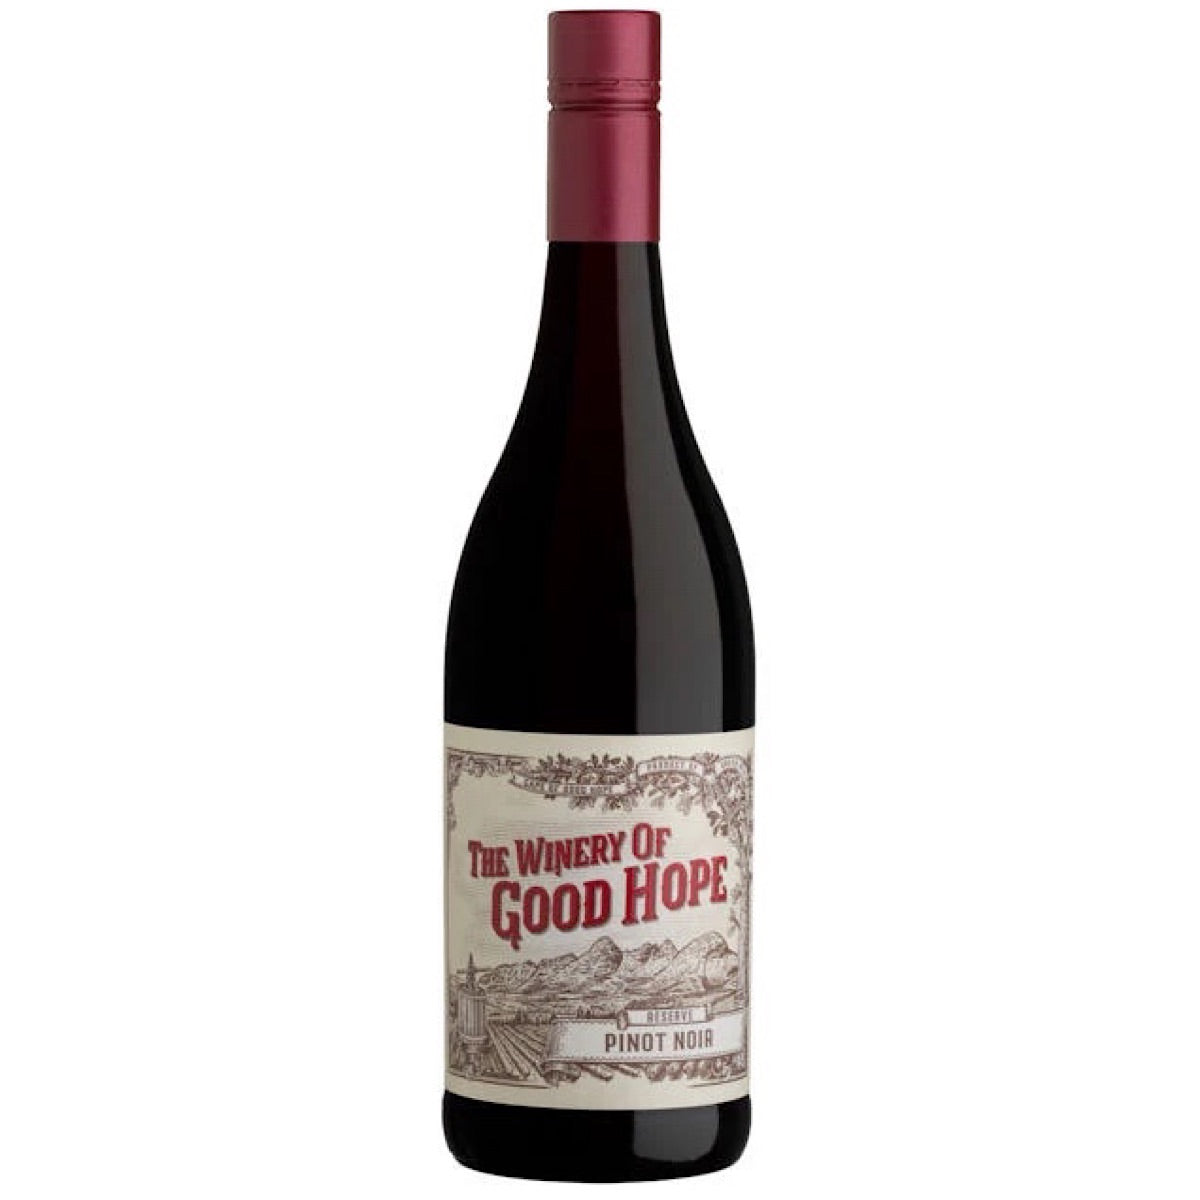 THE WINERY OF GOOD HOPE, PINOT NOIR, 6 Bottle Case 75cl